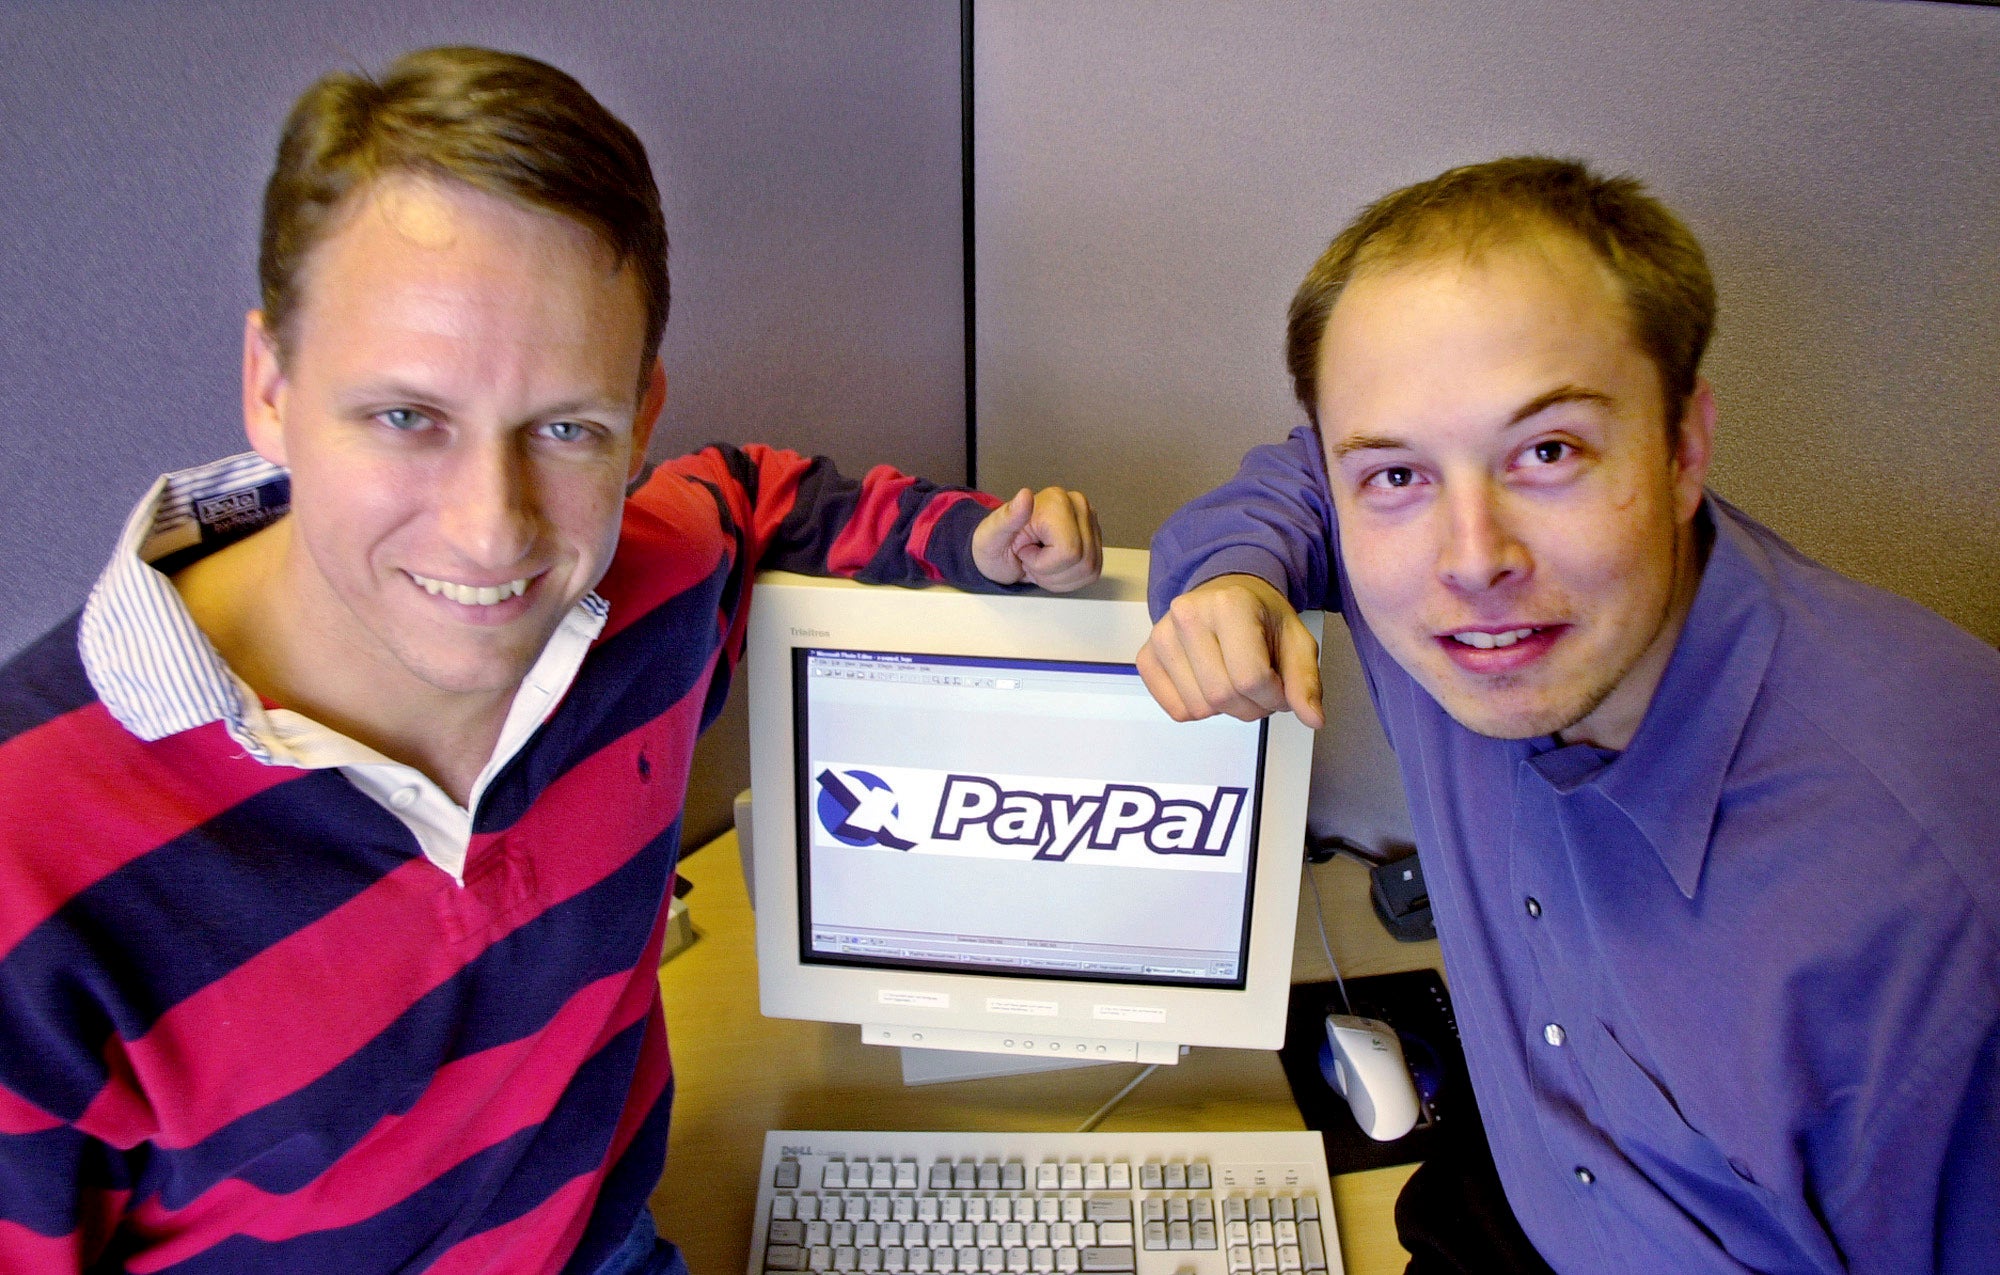 Peter Thiel, left, and Elon Musk, right, pose with the PayPal logo in 2000